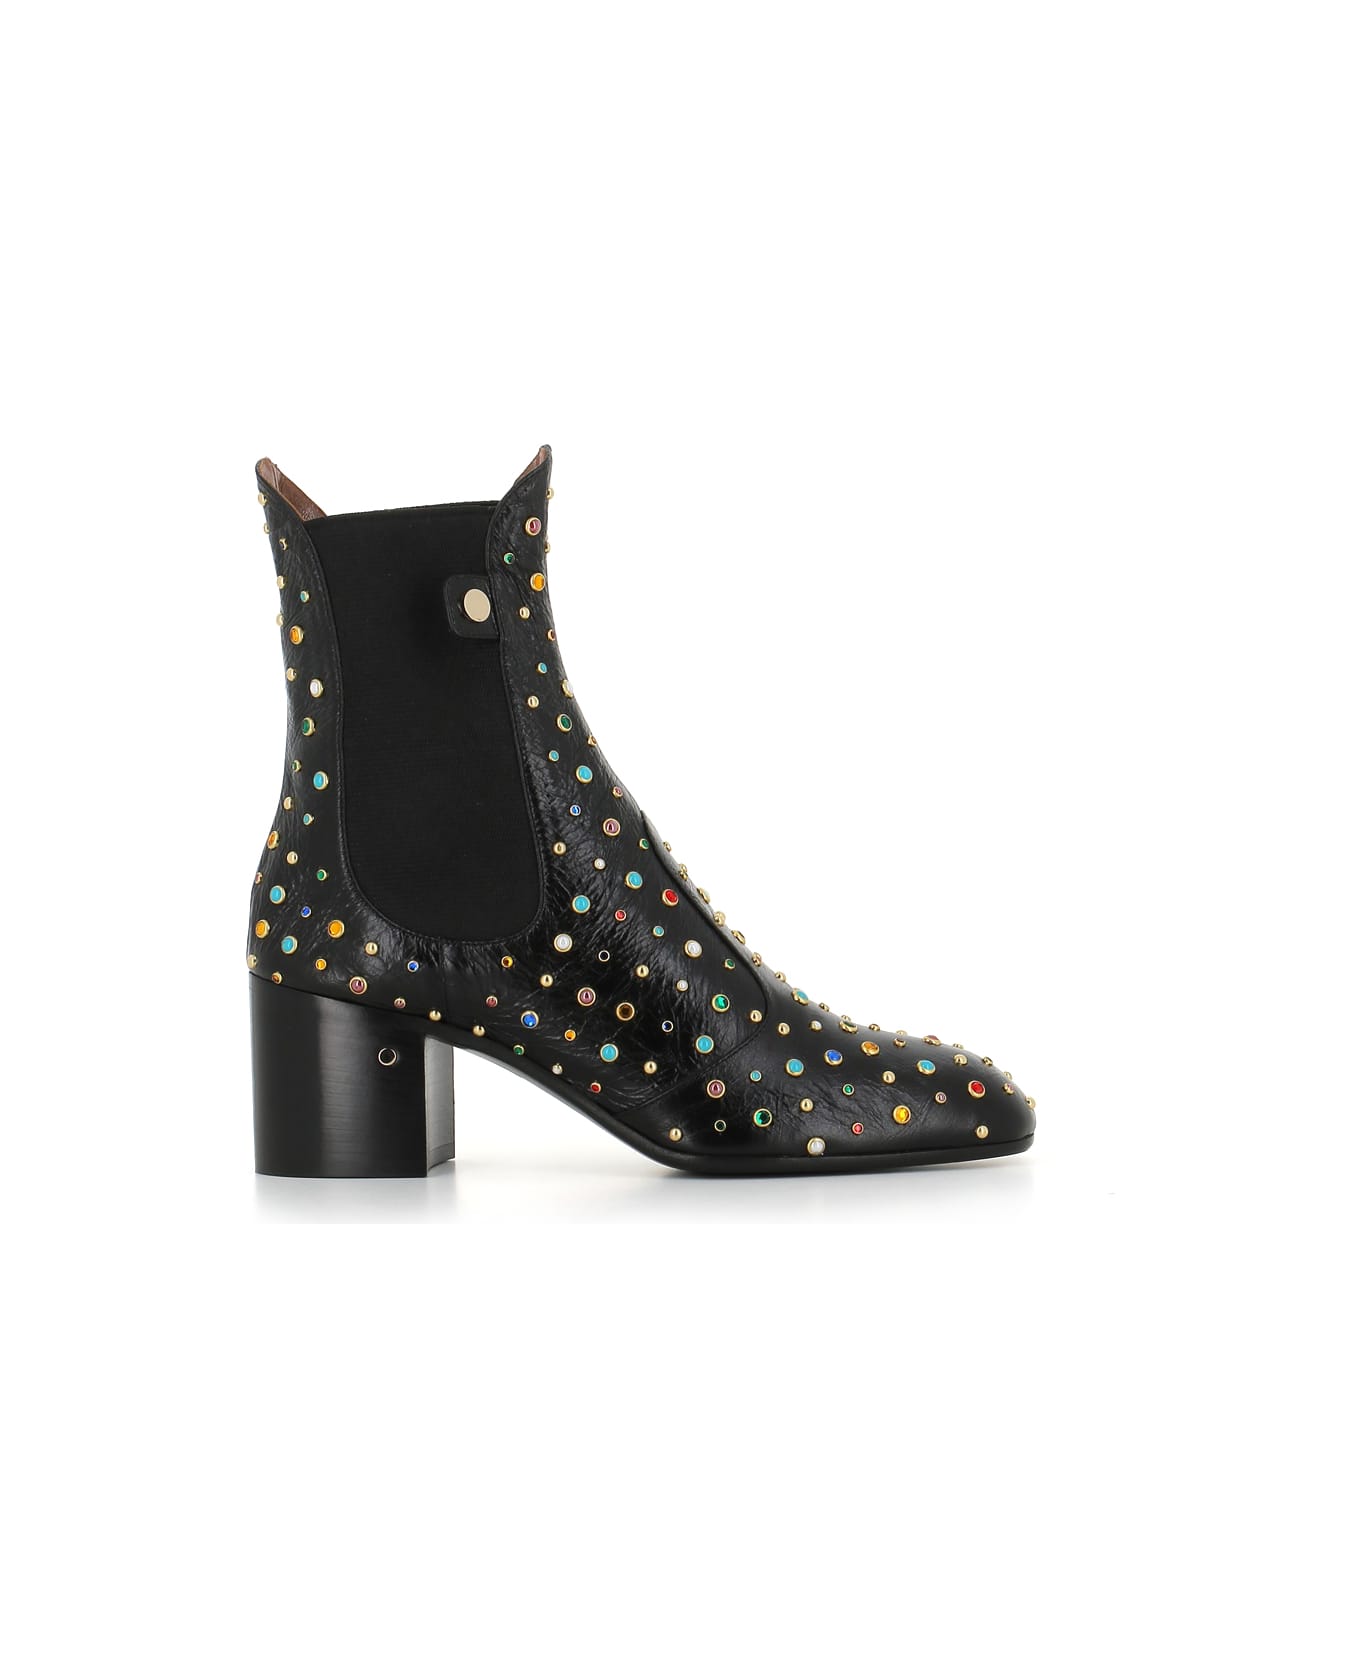 Laurence Dacade Boot Angie Multicolor Studs - Black ブーツ